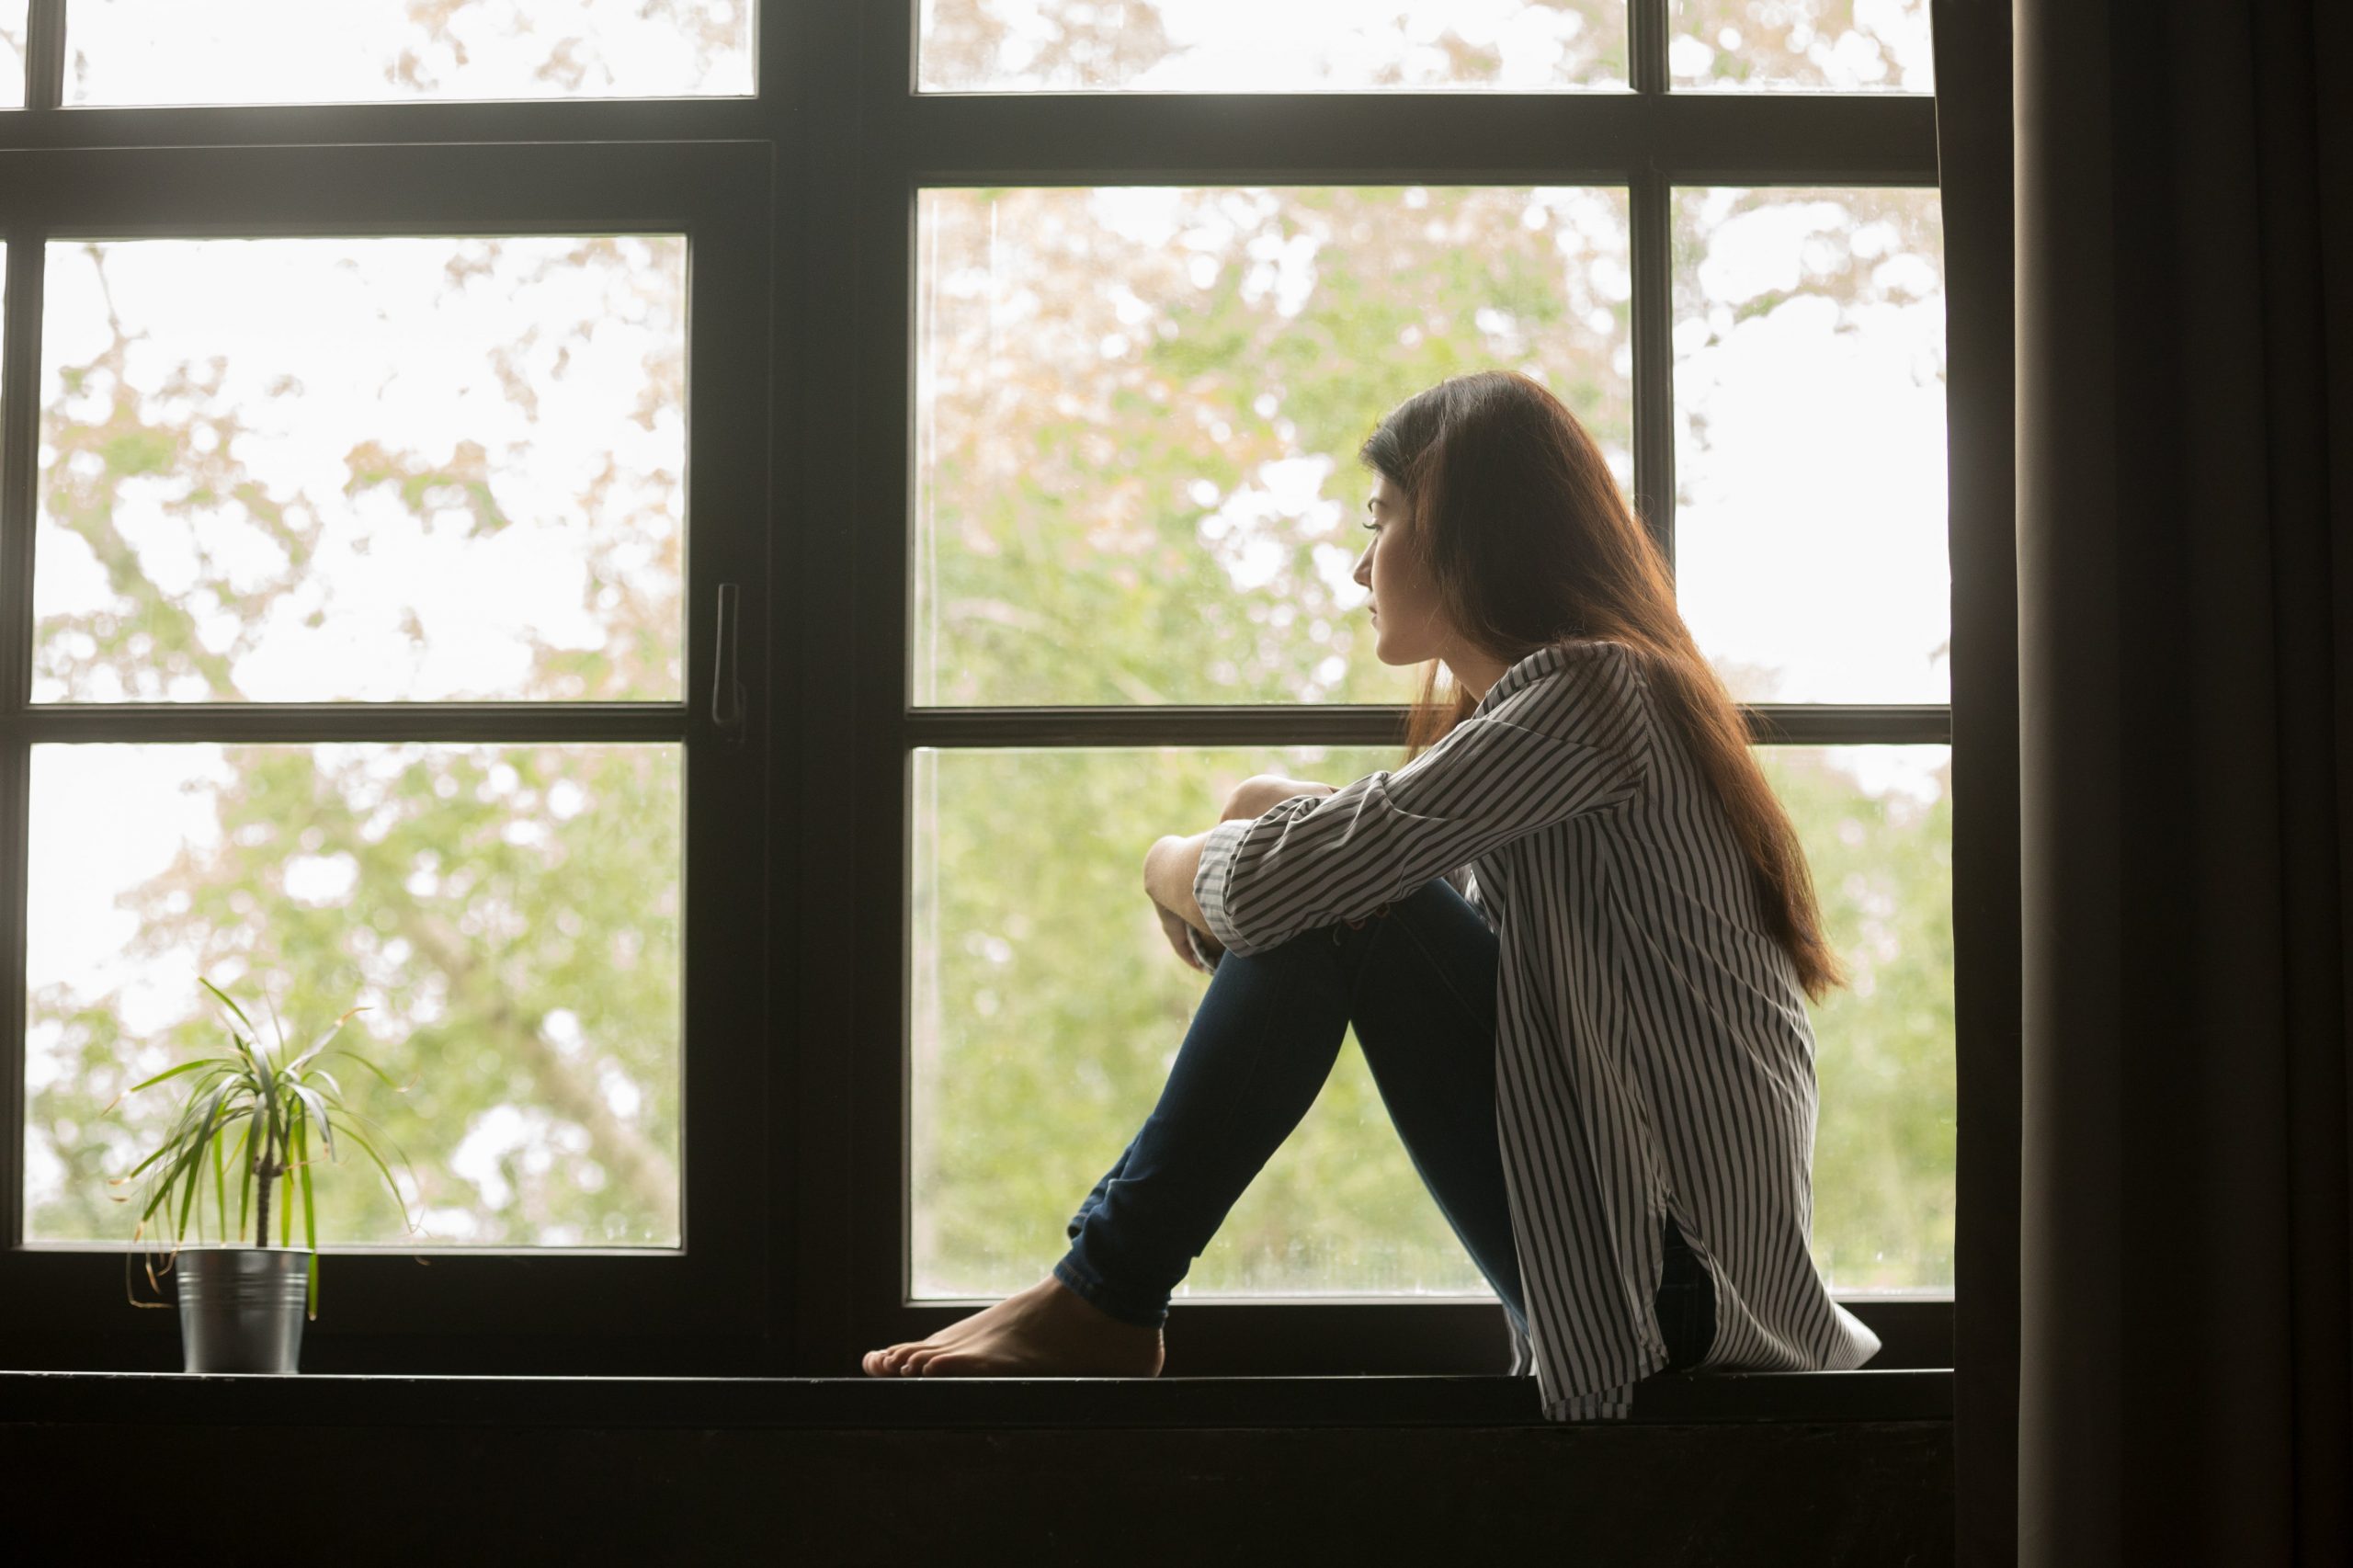 Young woman sitting by window, looking out and thinking quietly